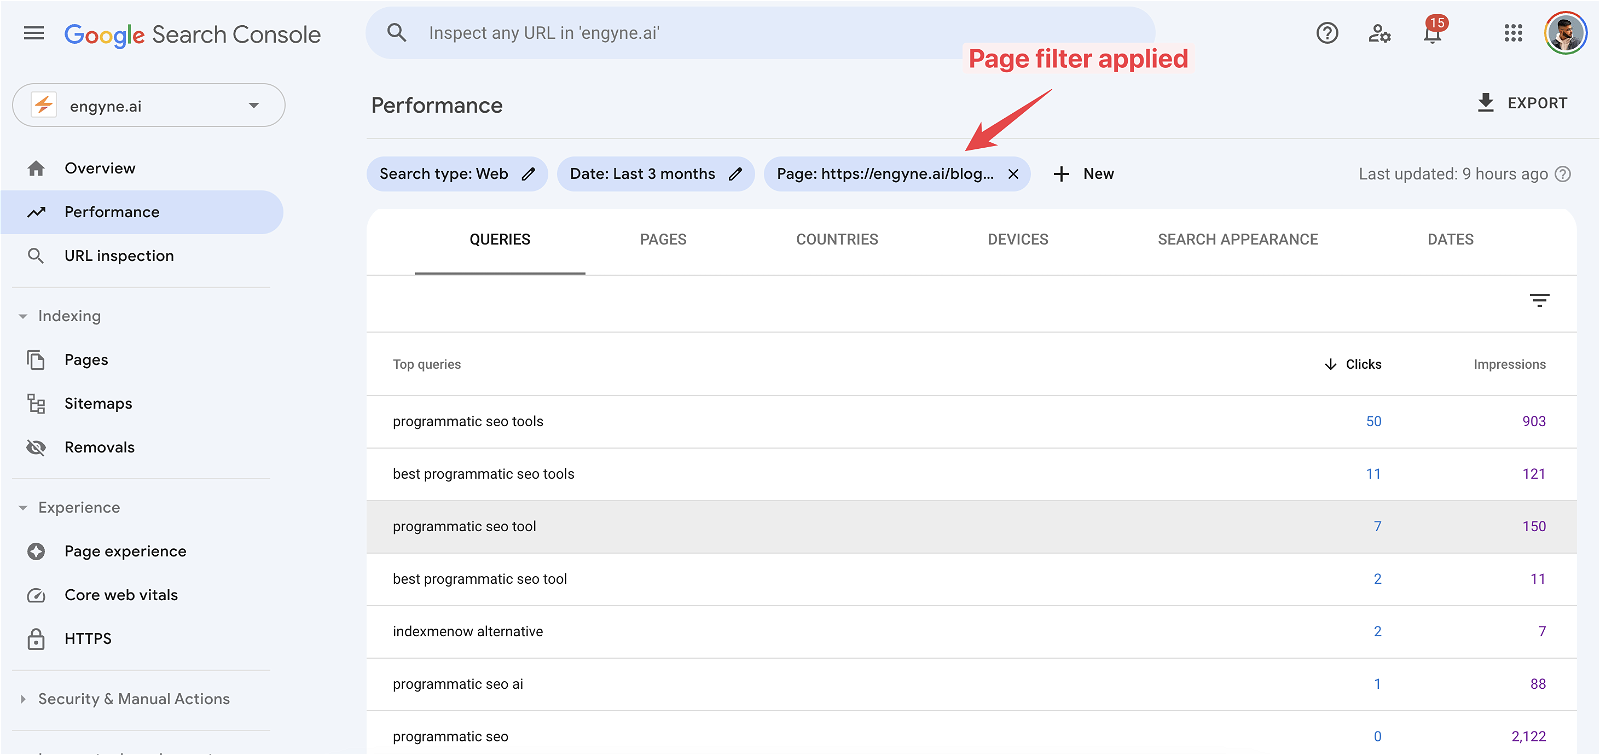 Page filter applied to the Performance report in Google Search Console